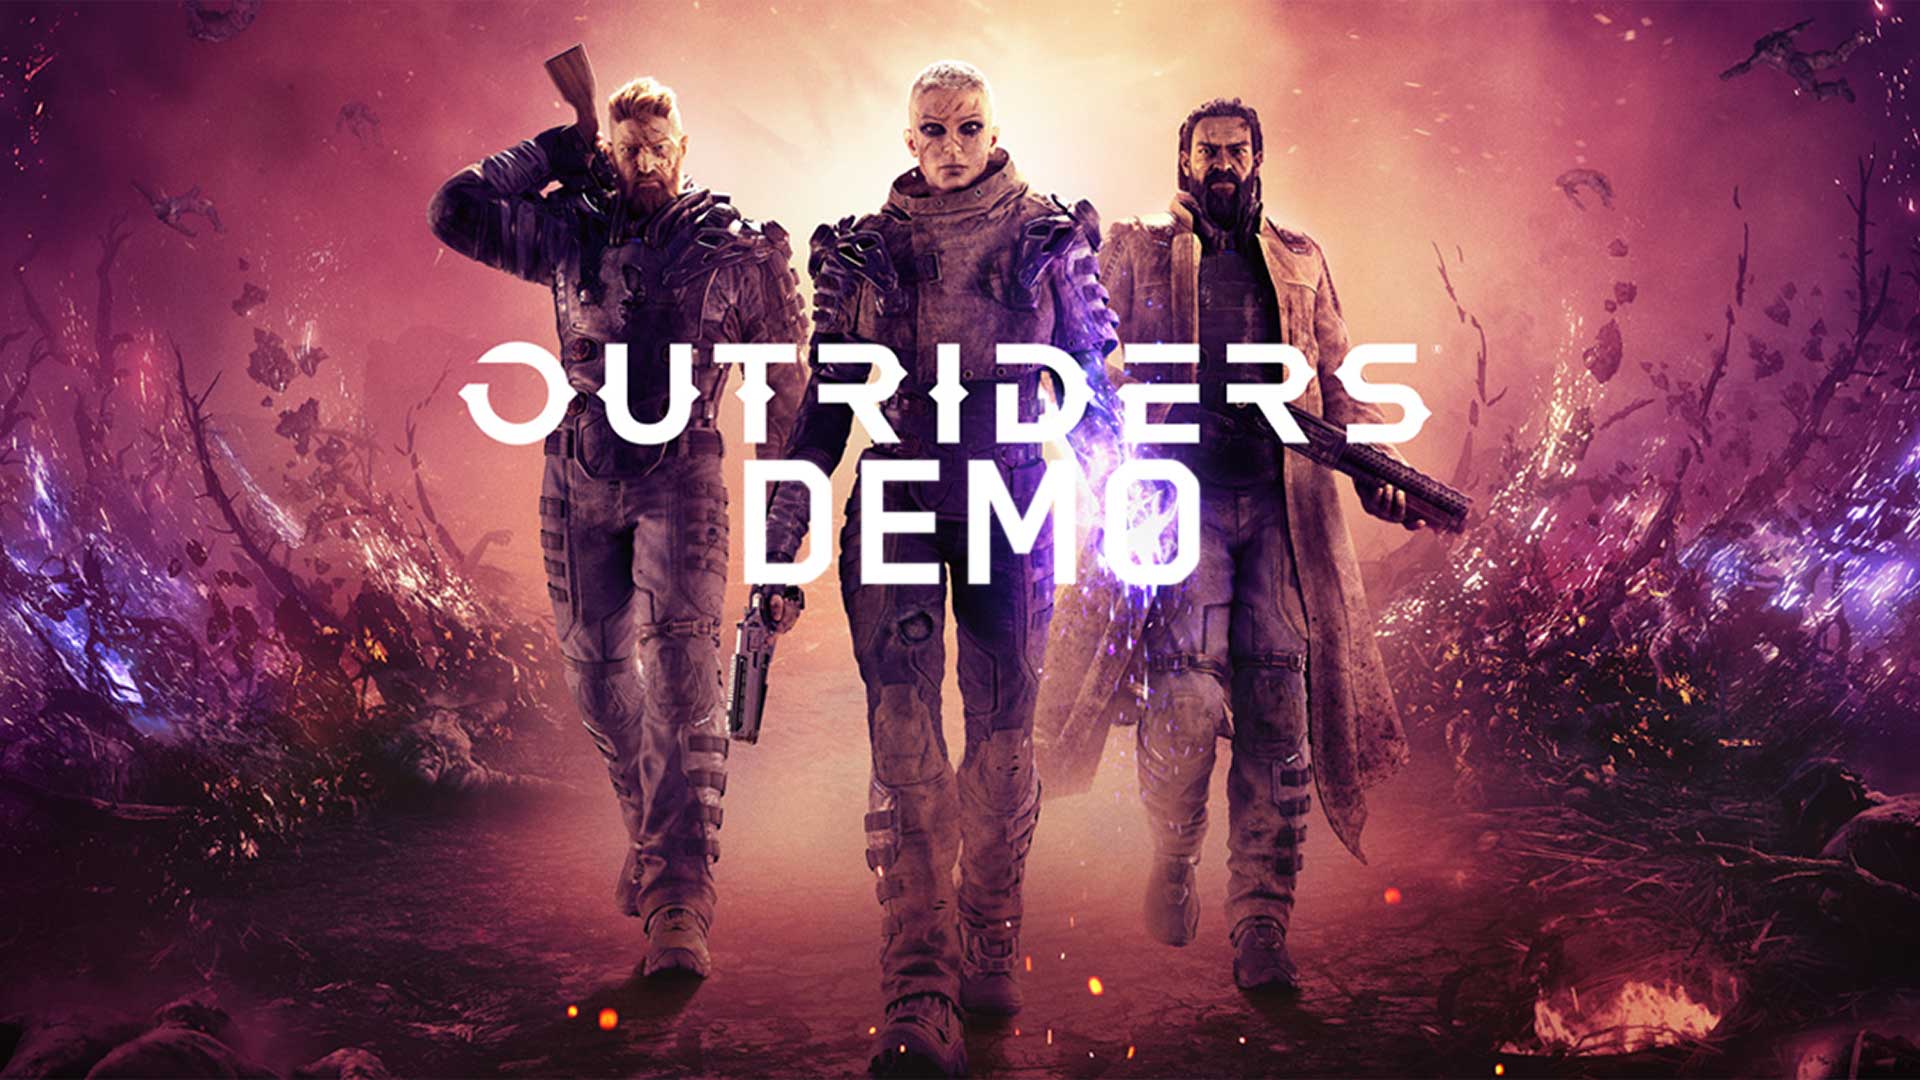 outriders release demo